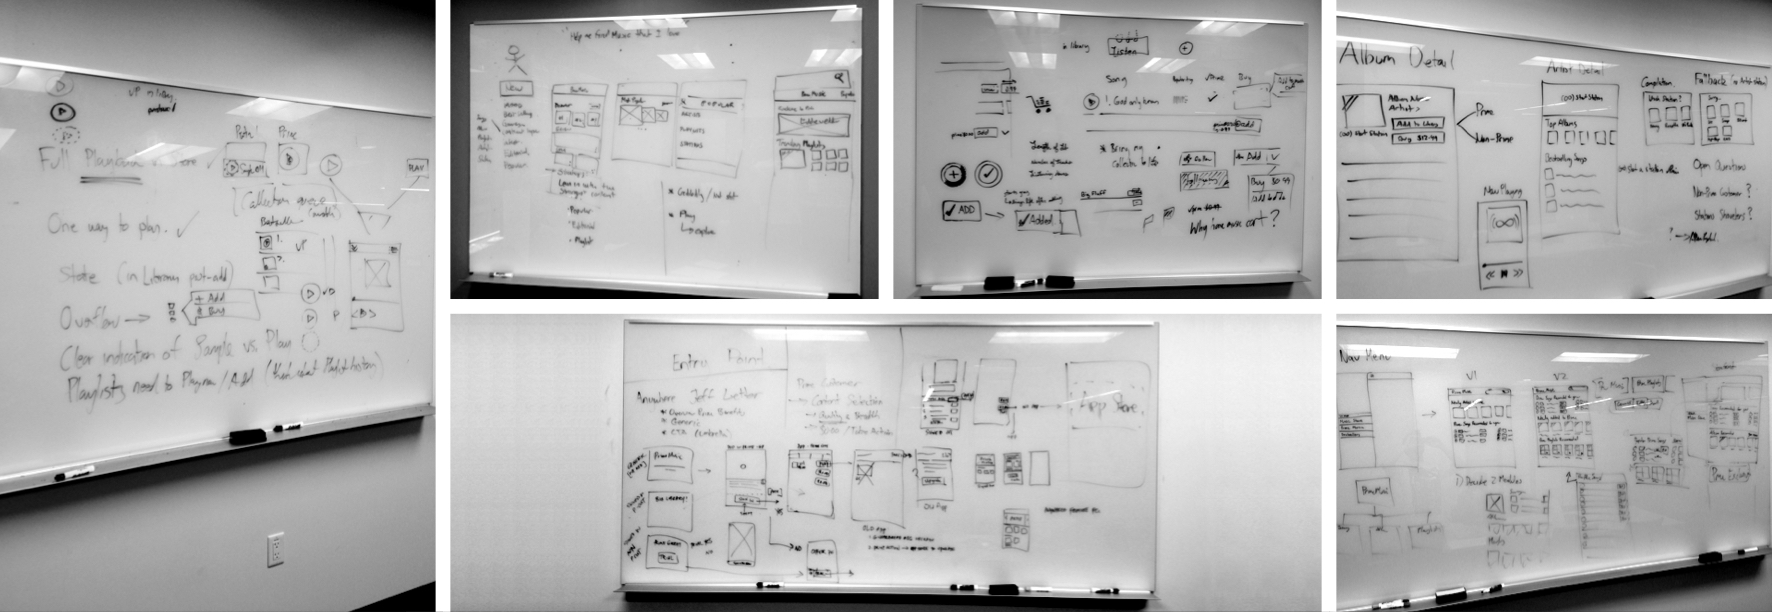 Shows six photos of whiteboard concepts.